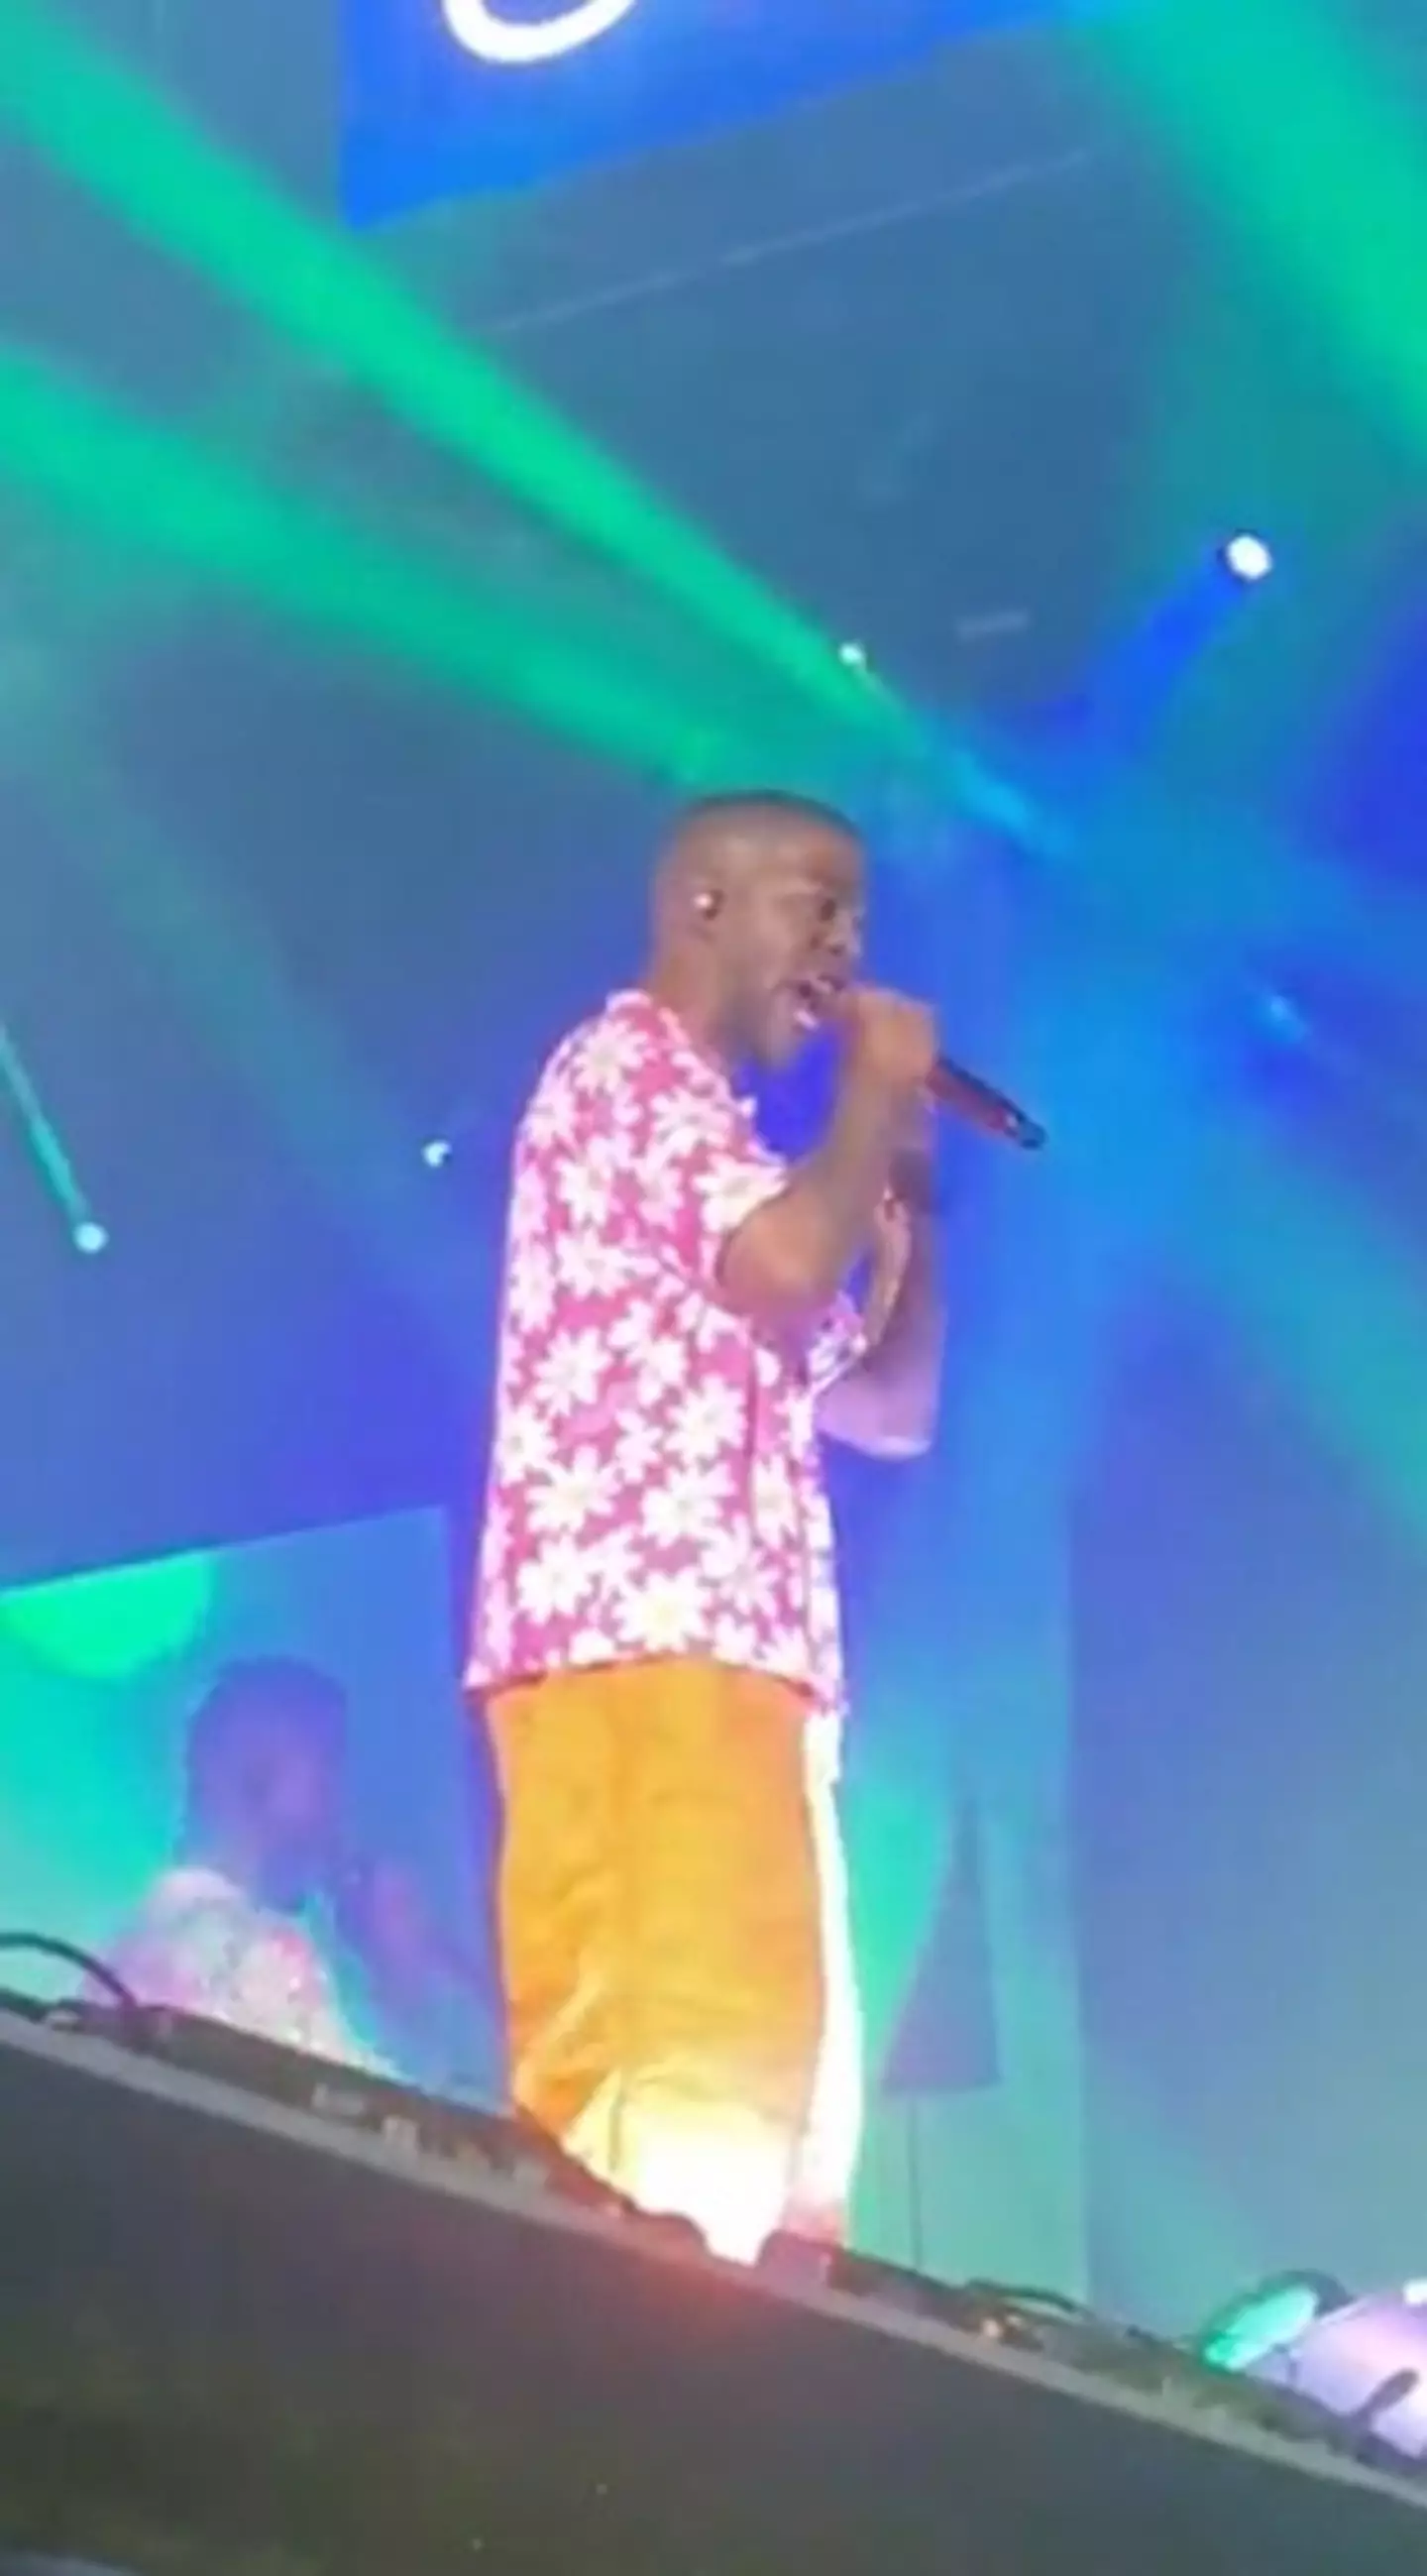 Kid Cudi angrily stormed off stage after fans kept throwing things at him during set.